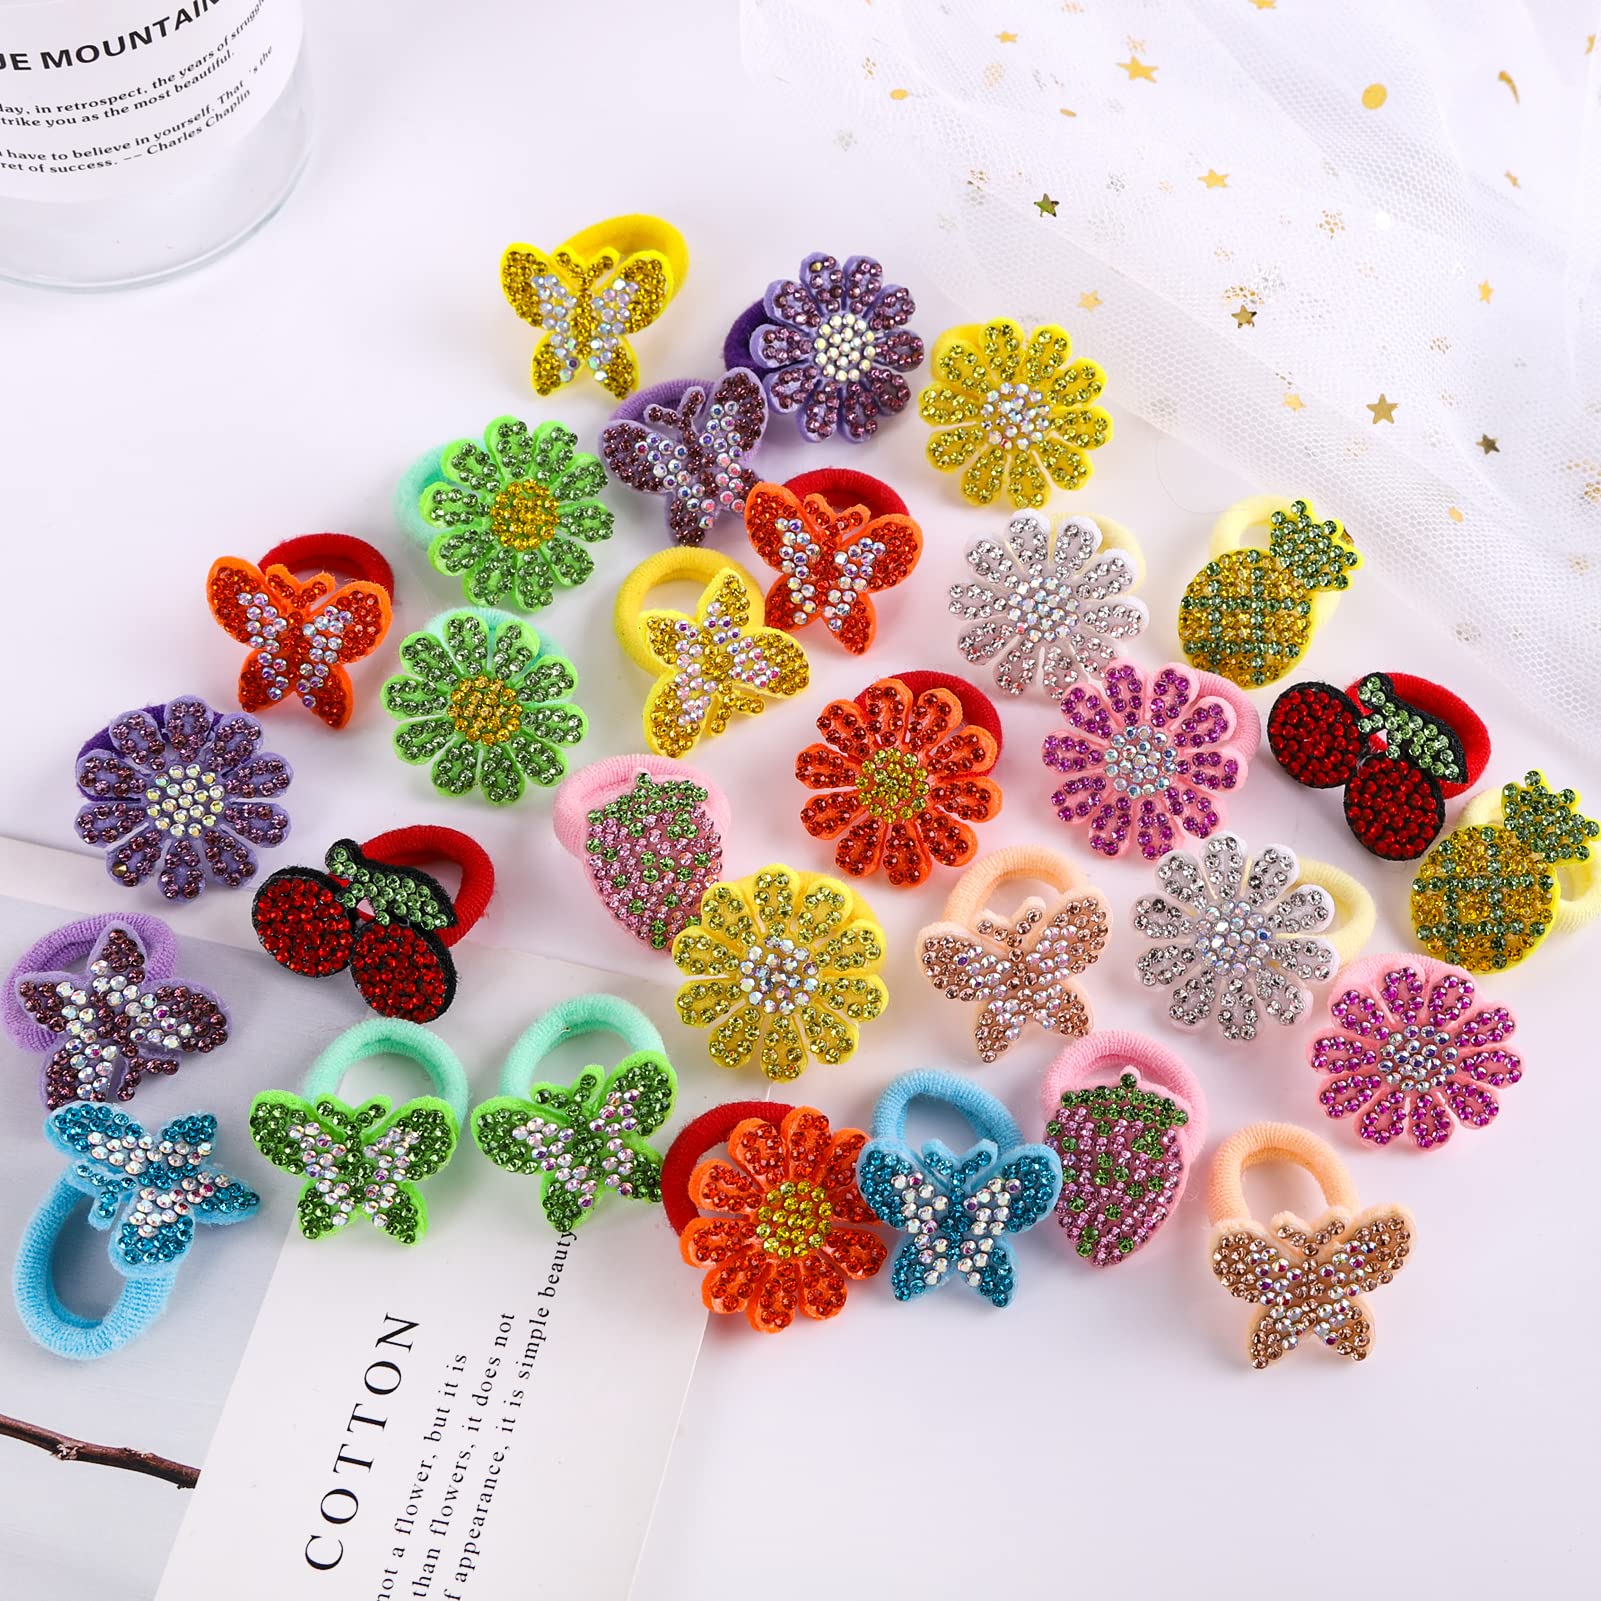 Fishdown 30 Pcs Glitter Hair Ties for Girls Sequin Hair Ties for Toddlers Seamless Small Ponytail Holders Rhinestone Sequin Sparkle Flower Butterfly cartoon Accessories Elastic Rubber Bands for Kids